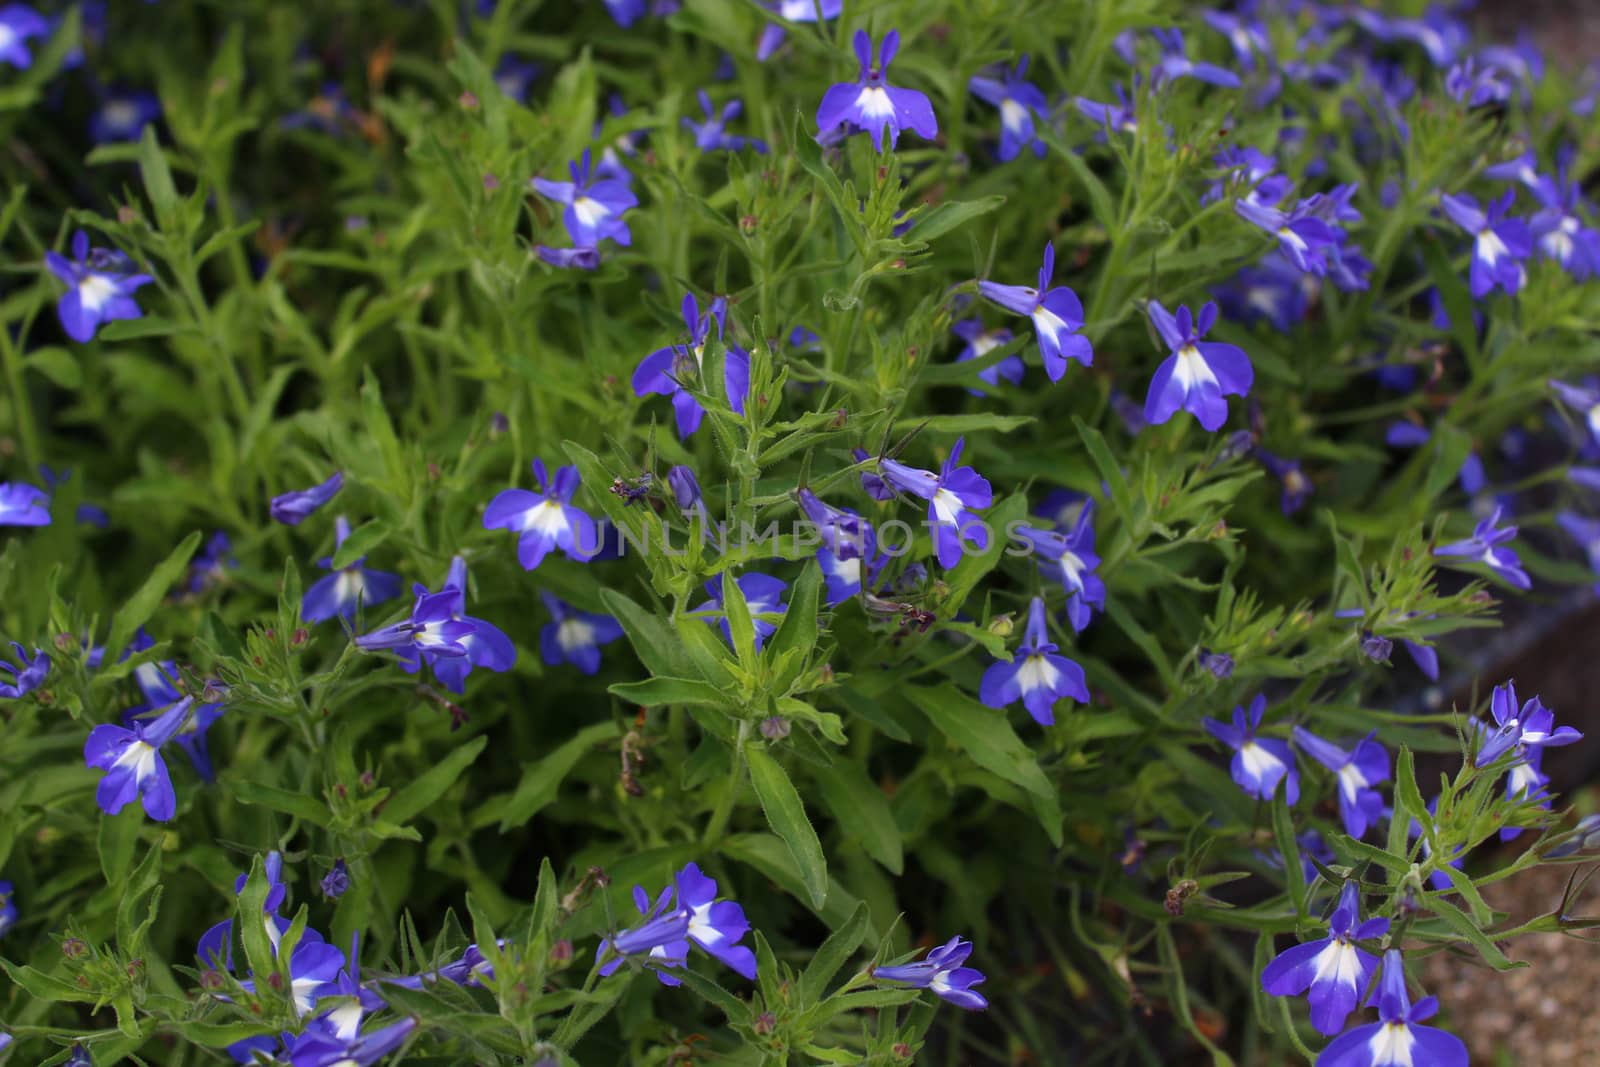 The picture shows a field with lobelia in the garden